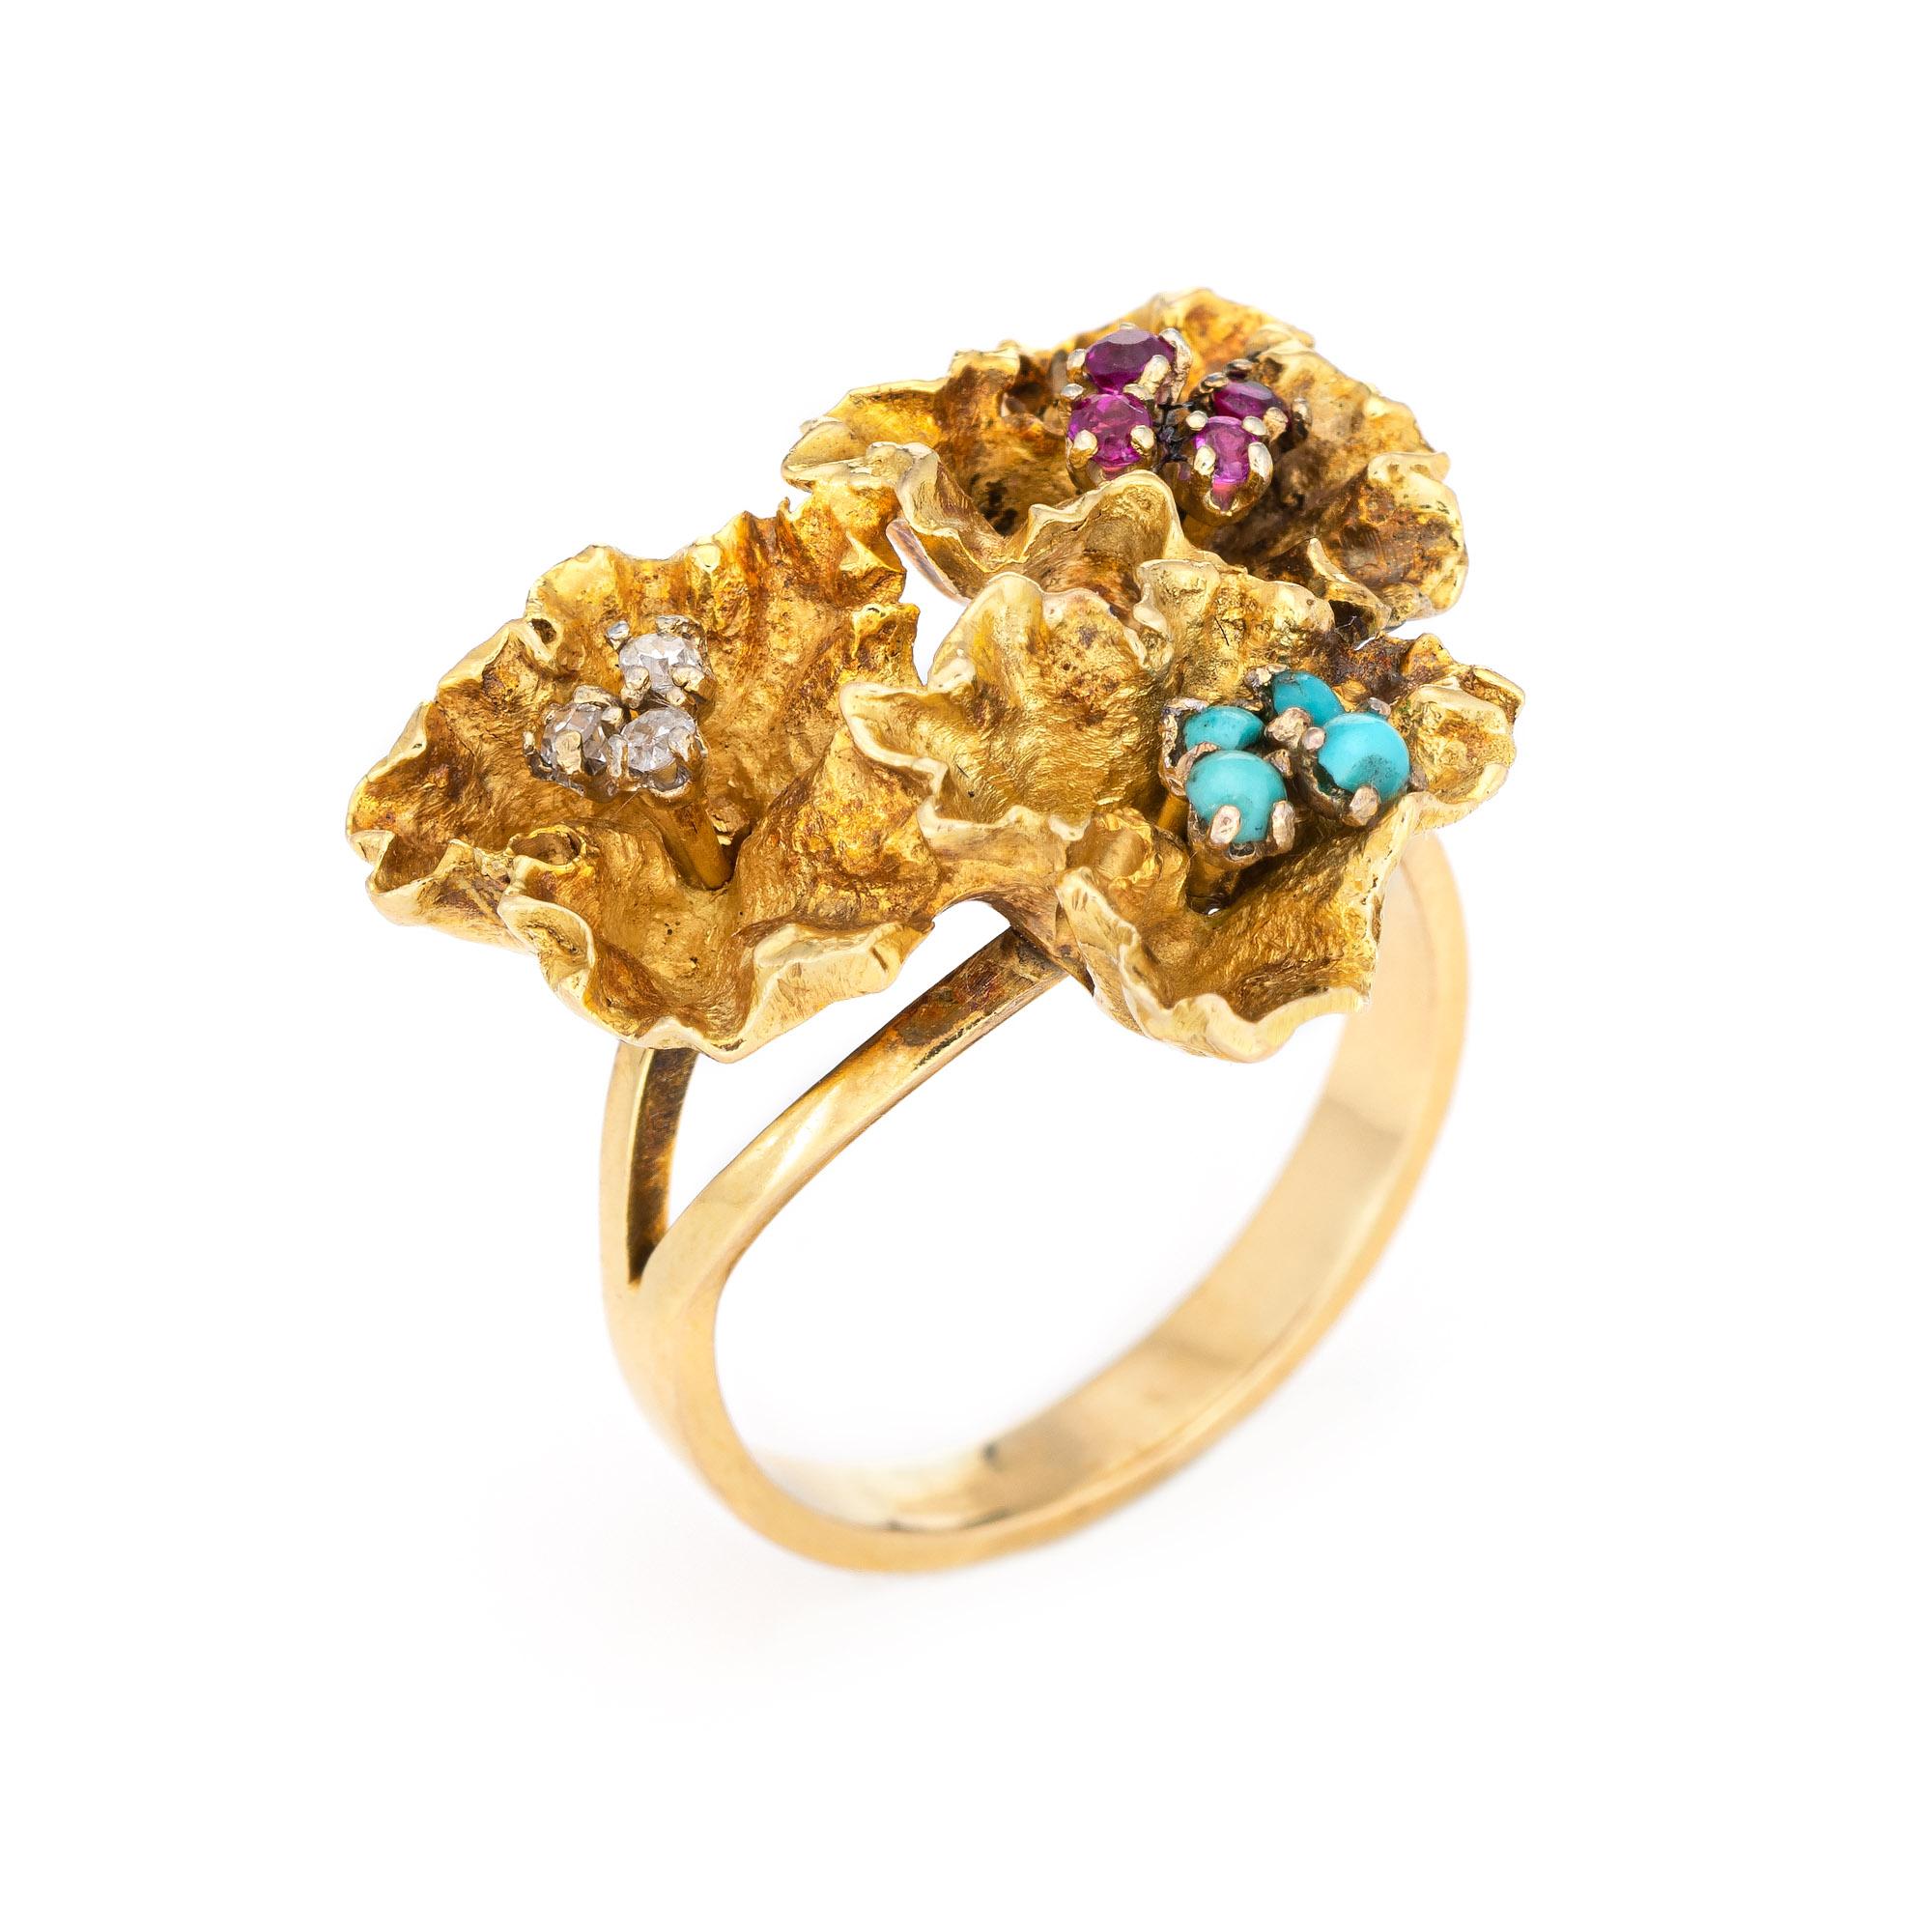 Stylish vintage paper flowers gemstone ring (circa 1960s to 1970s) crafted in 18 karat yellow gold. 

Diamonds total an estimated 0.03 carats (estimated at H-I color and SI1-I1 clarity), accented with an estimated 0.04 carats of rubies and 0.04